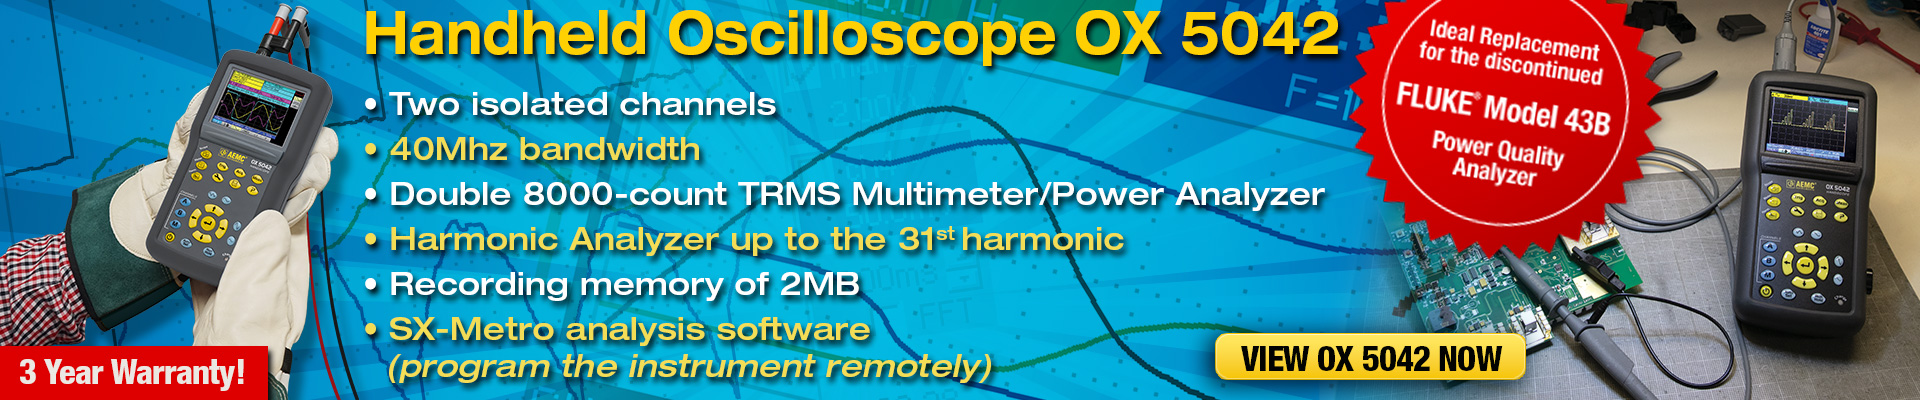 Three instruments in one - our portable handheld oscilloscope.